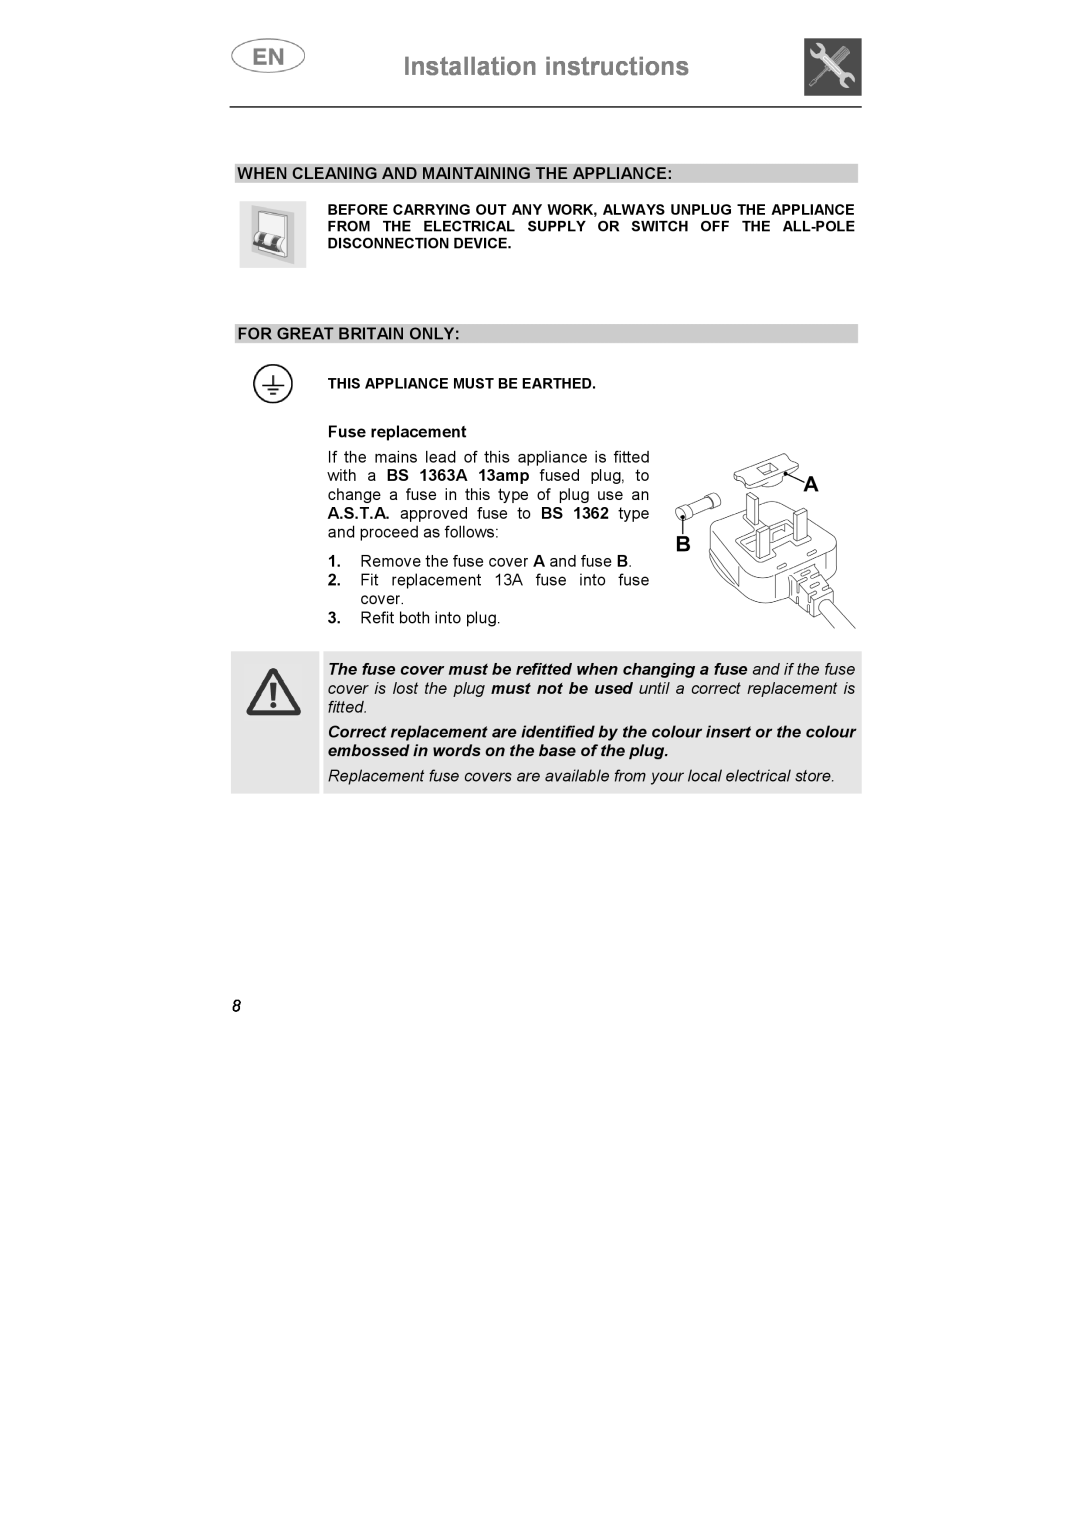 Smeg CA01-5, CA01-4, CA01S Installation instructions, When Cleaning And Maintaining The Appliance, For Great Britain Only 